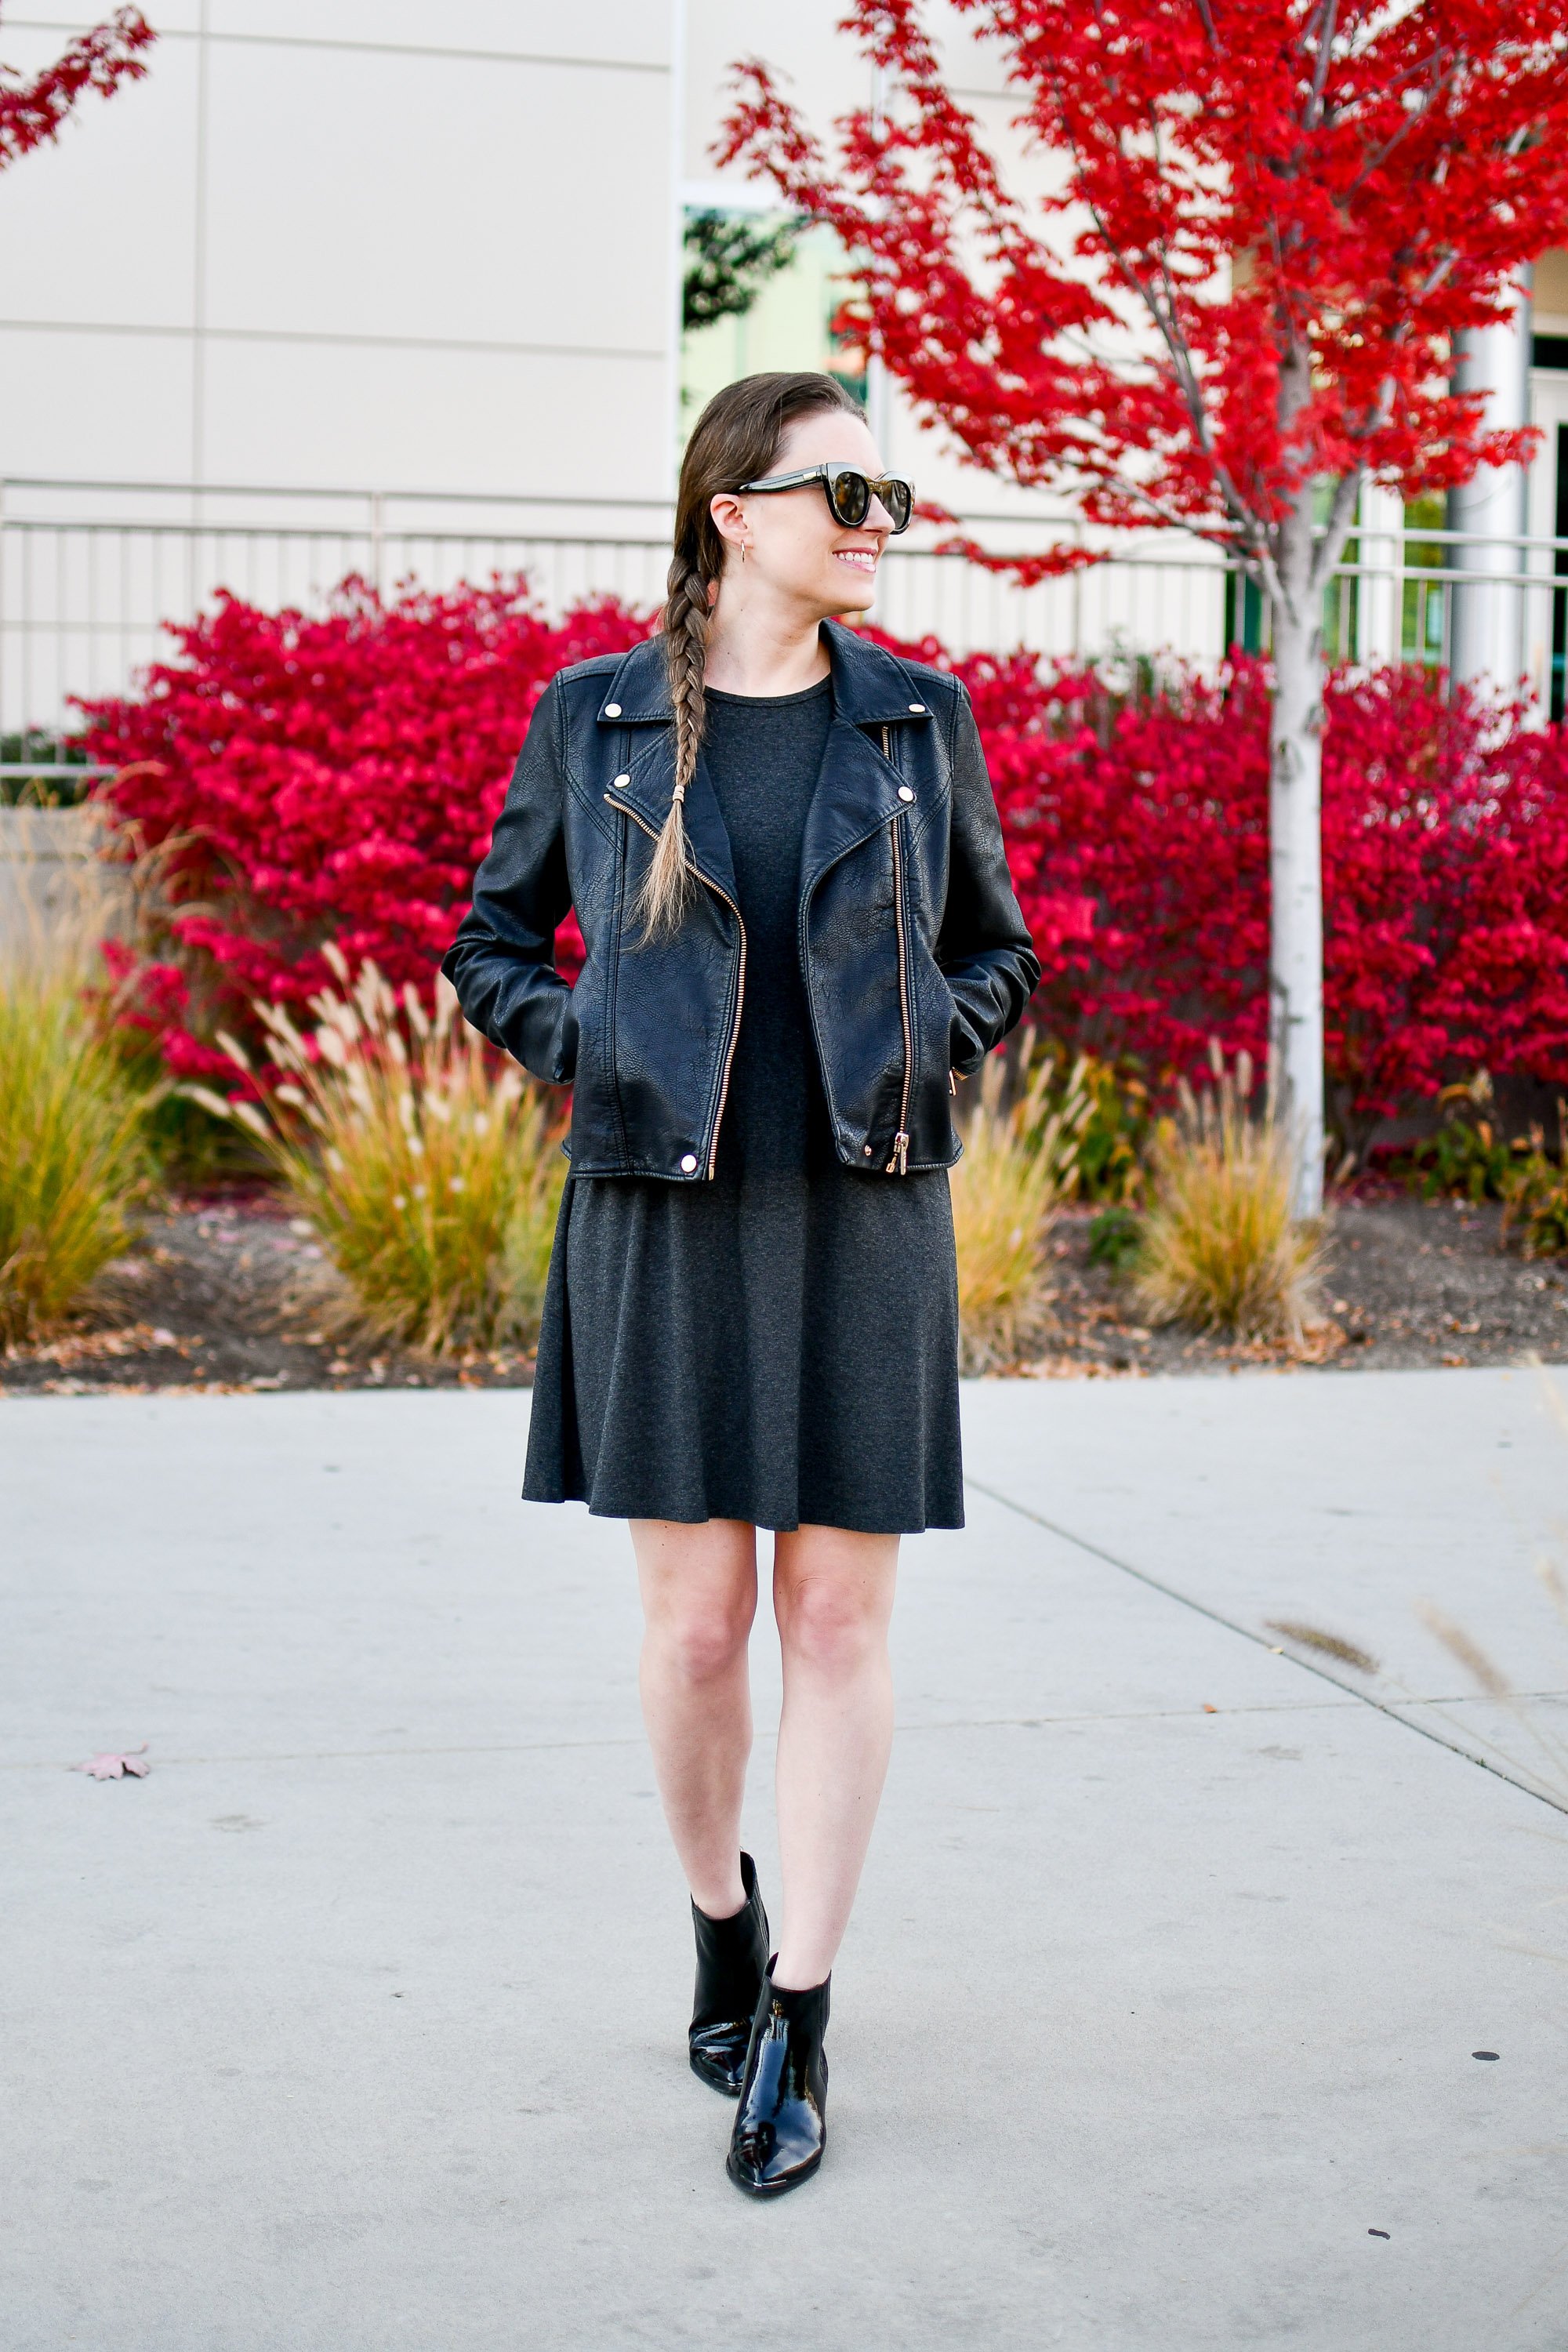 How to style a (faux) leather moto jacket + 14 outfit ideas